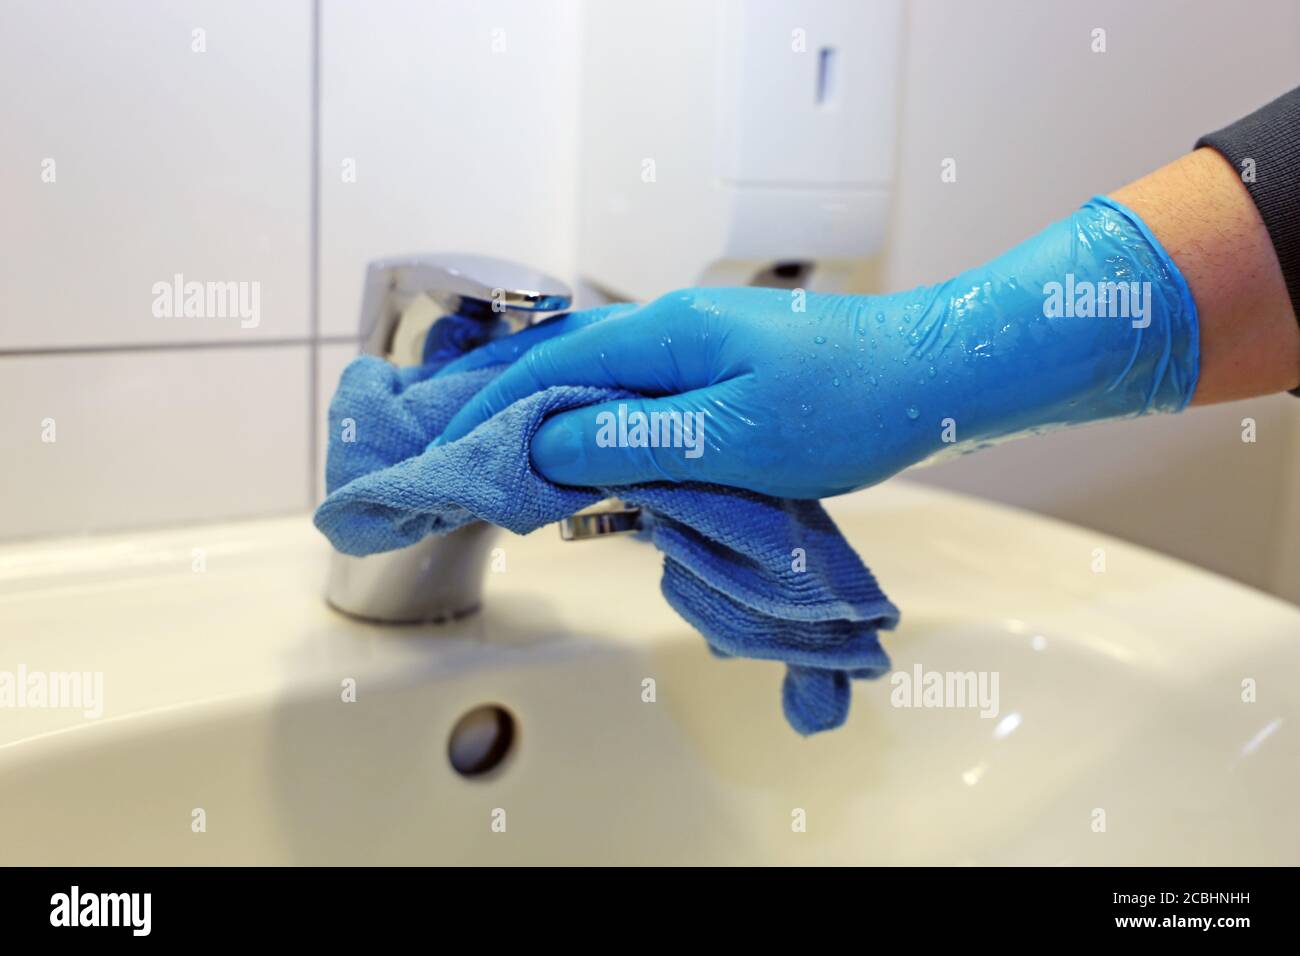 Cleaning and disinfection of a wash basin Stock Photo